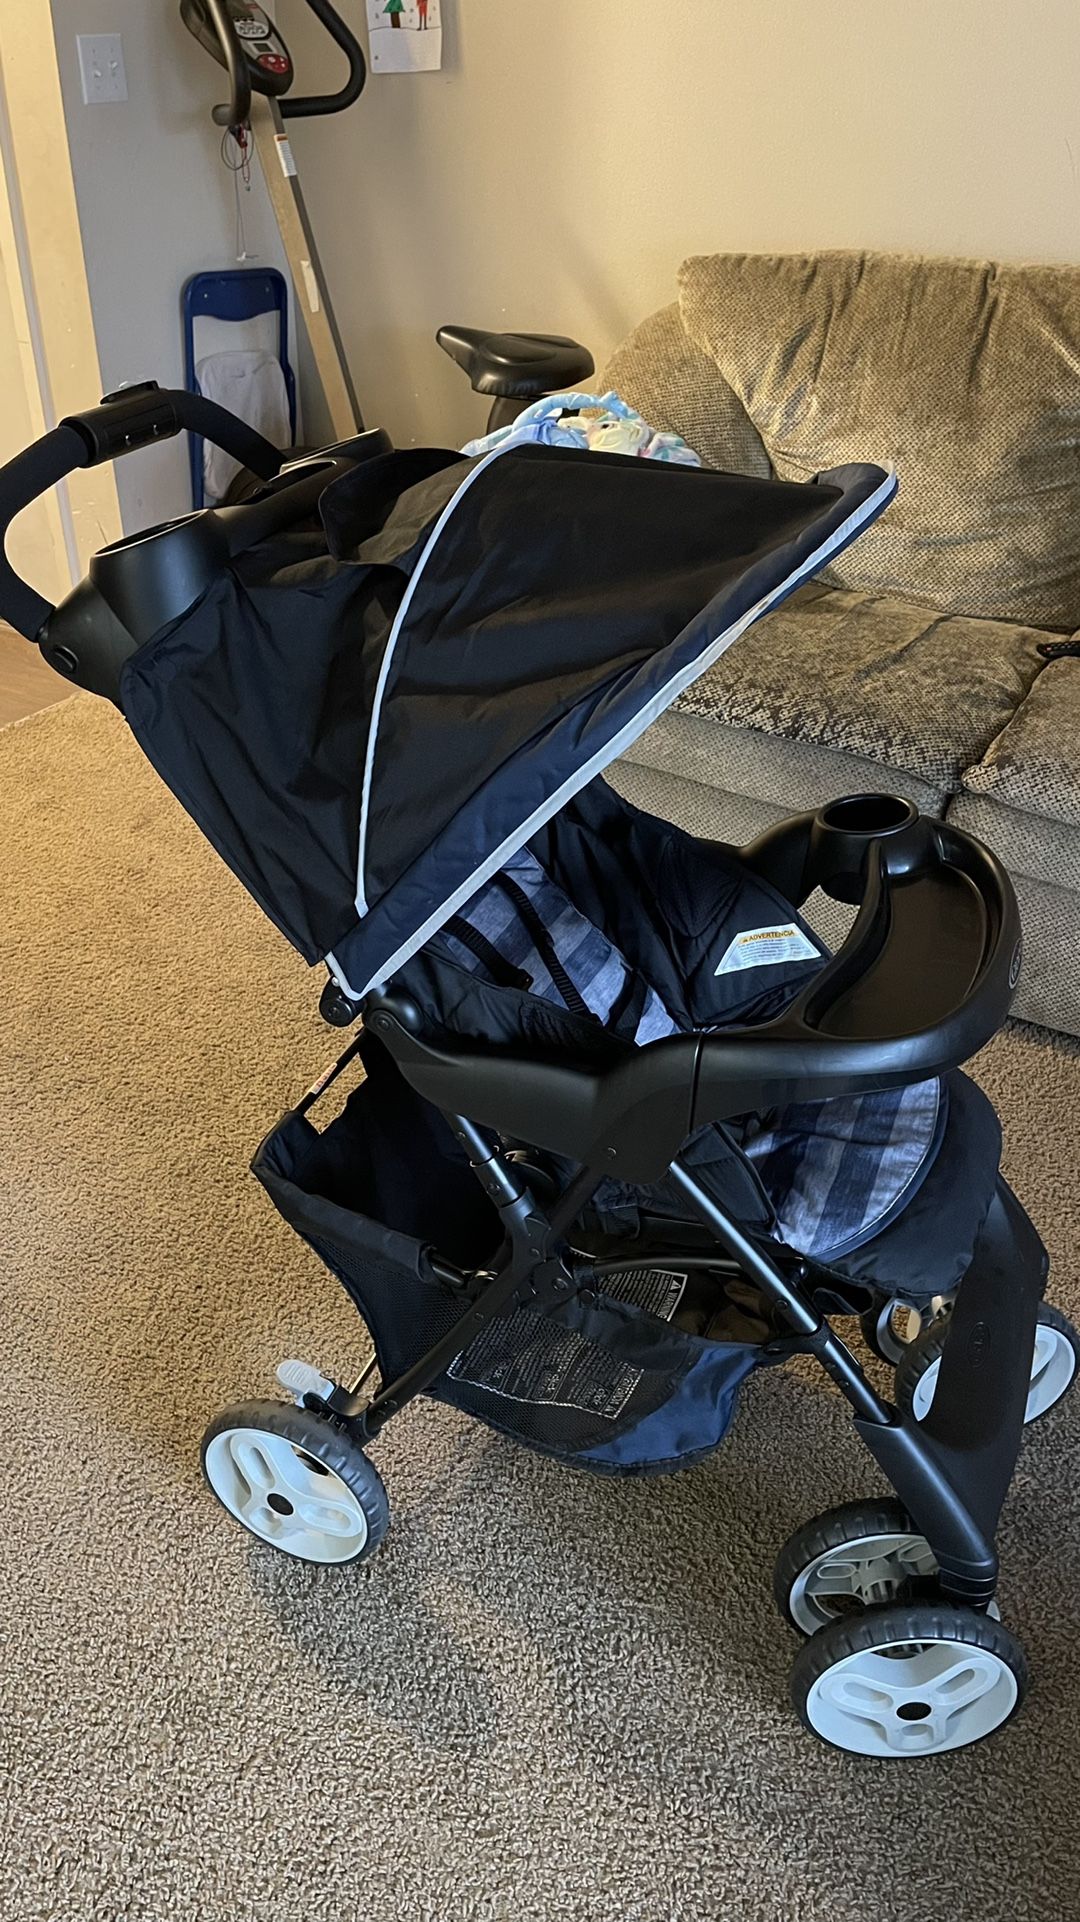 Graco Stroller And Car Seat W/Base